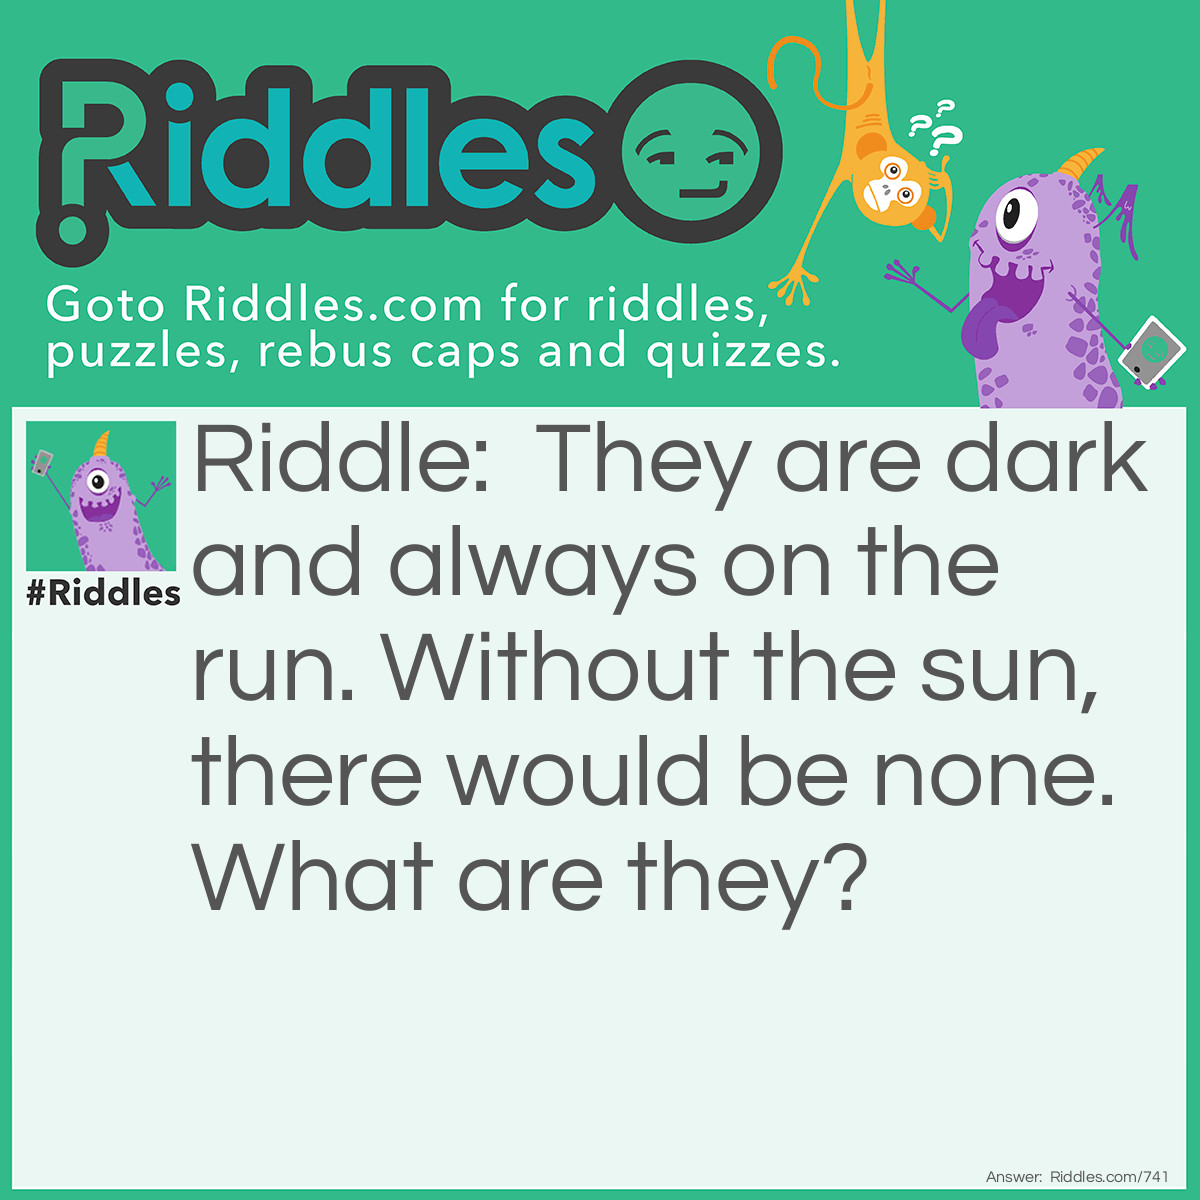 Riddle: They are dark and always on the run. Without the sun, there would be none. What are they? Answer: Shadows.